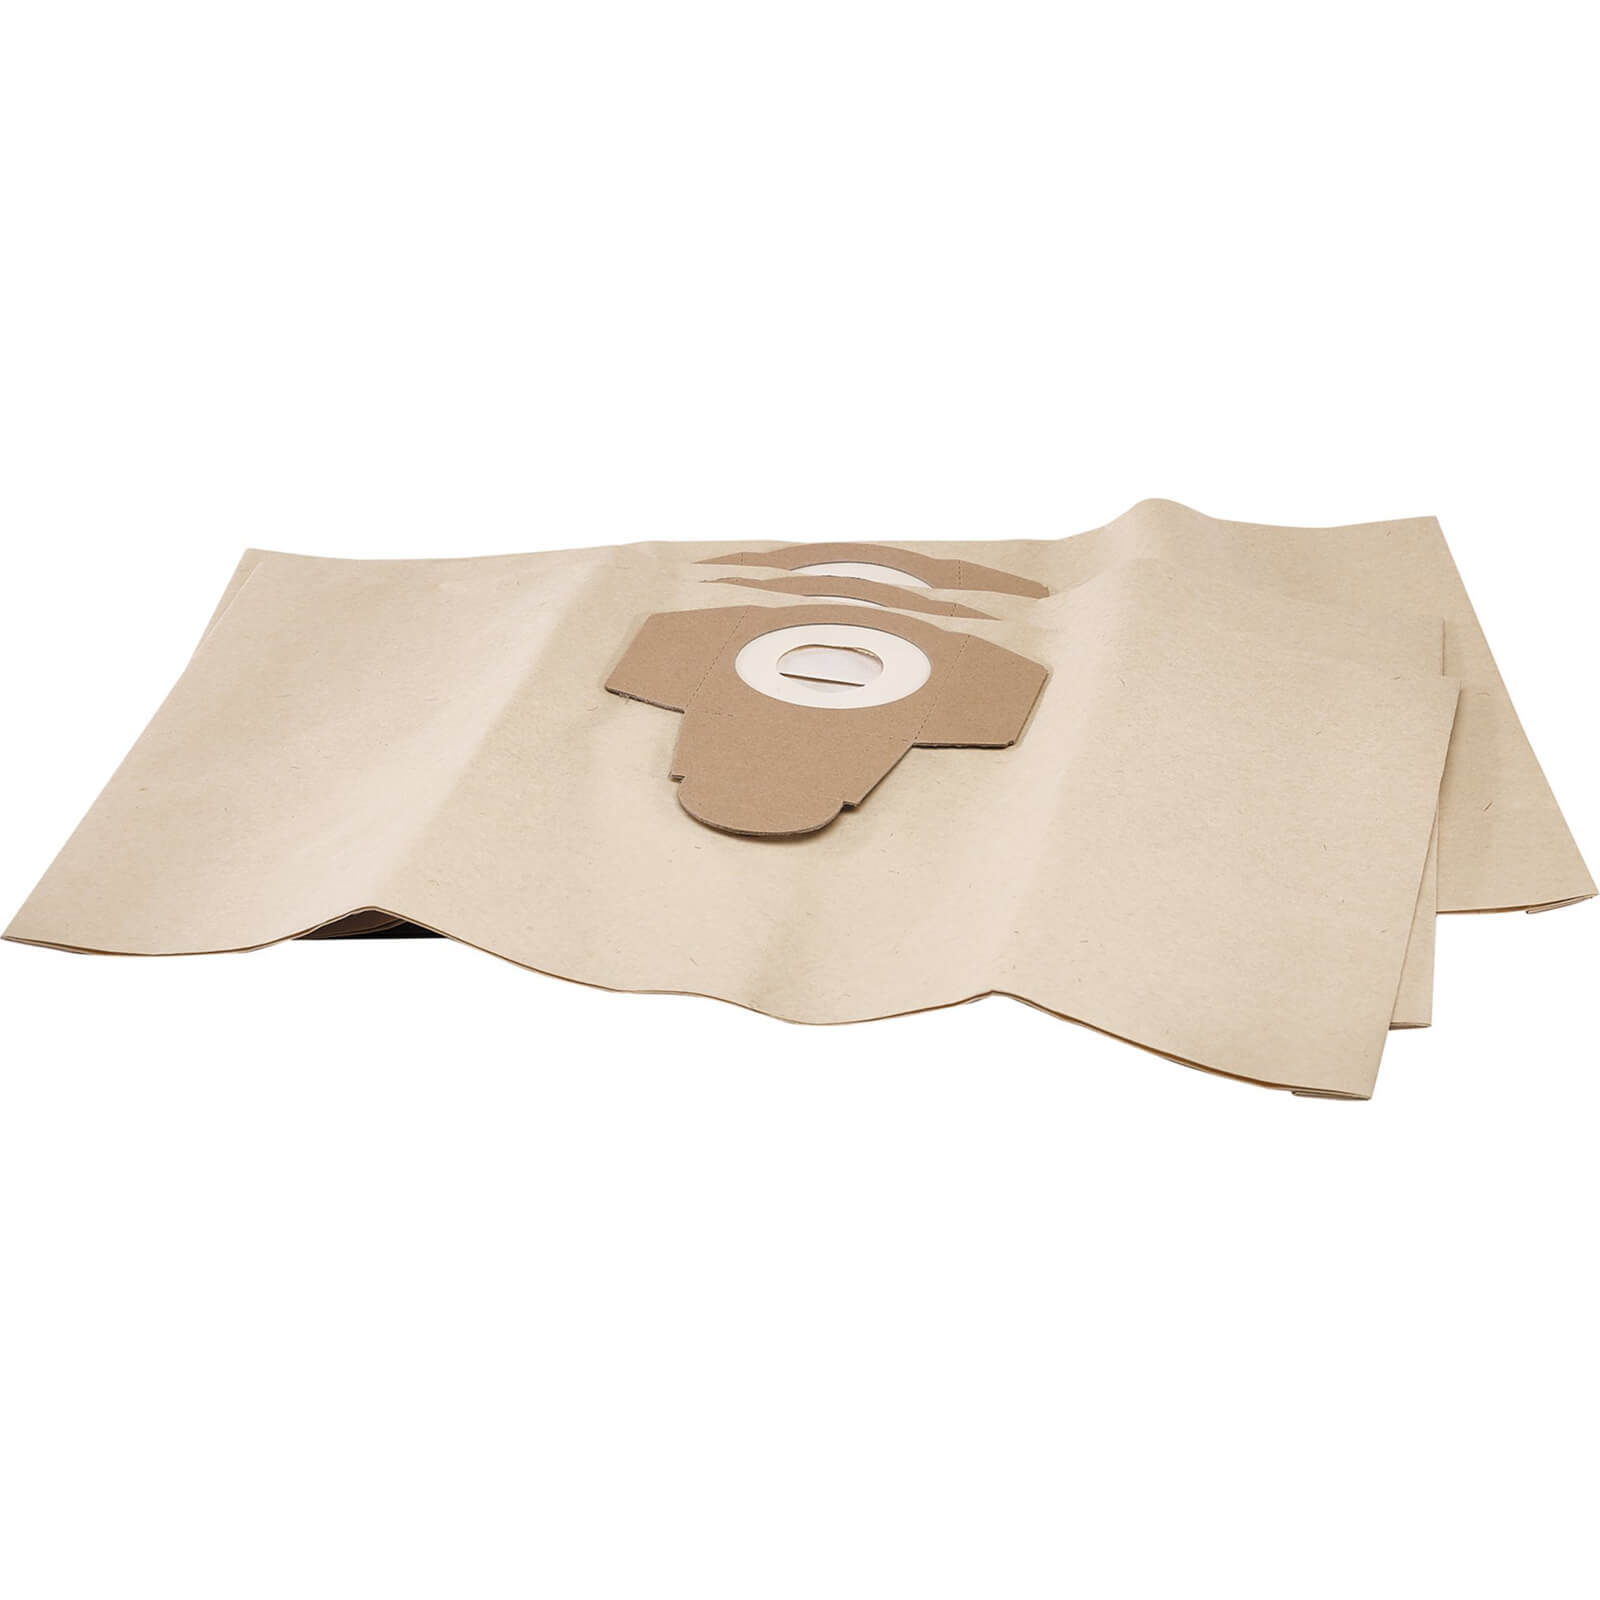 Image of Draper Paper Dust Bags for WDV20BSS Vacuum Cleaner Pack of 3